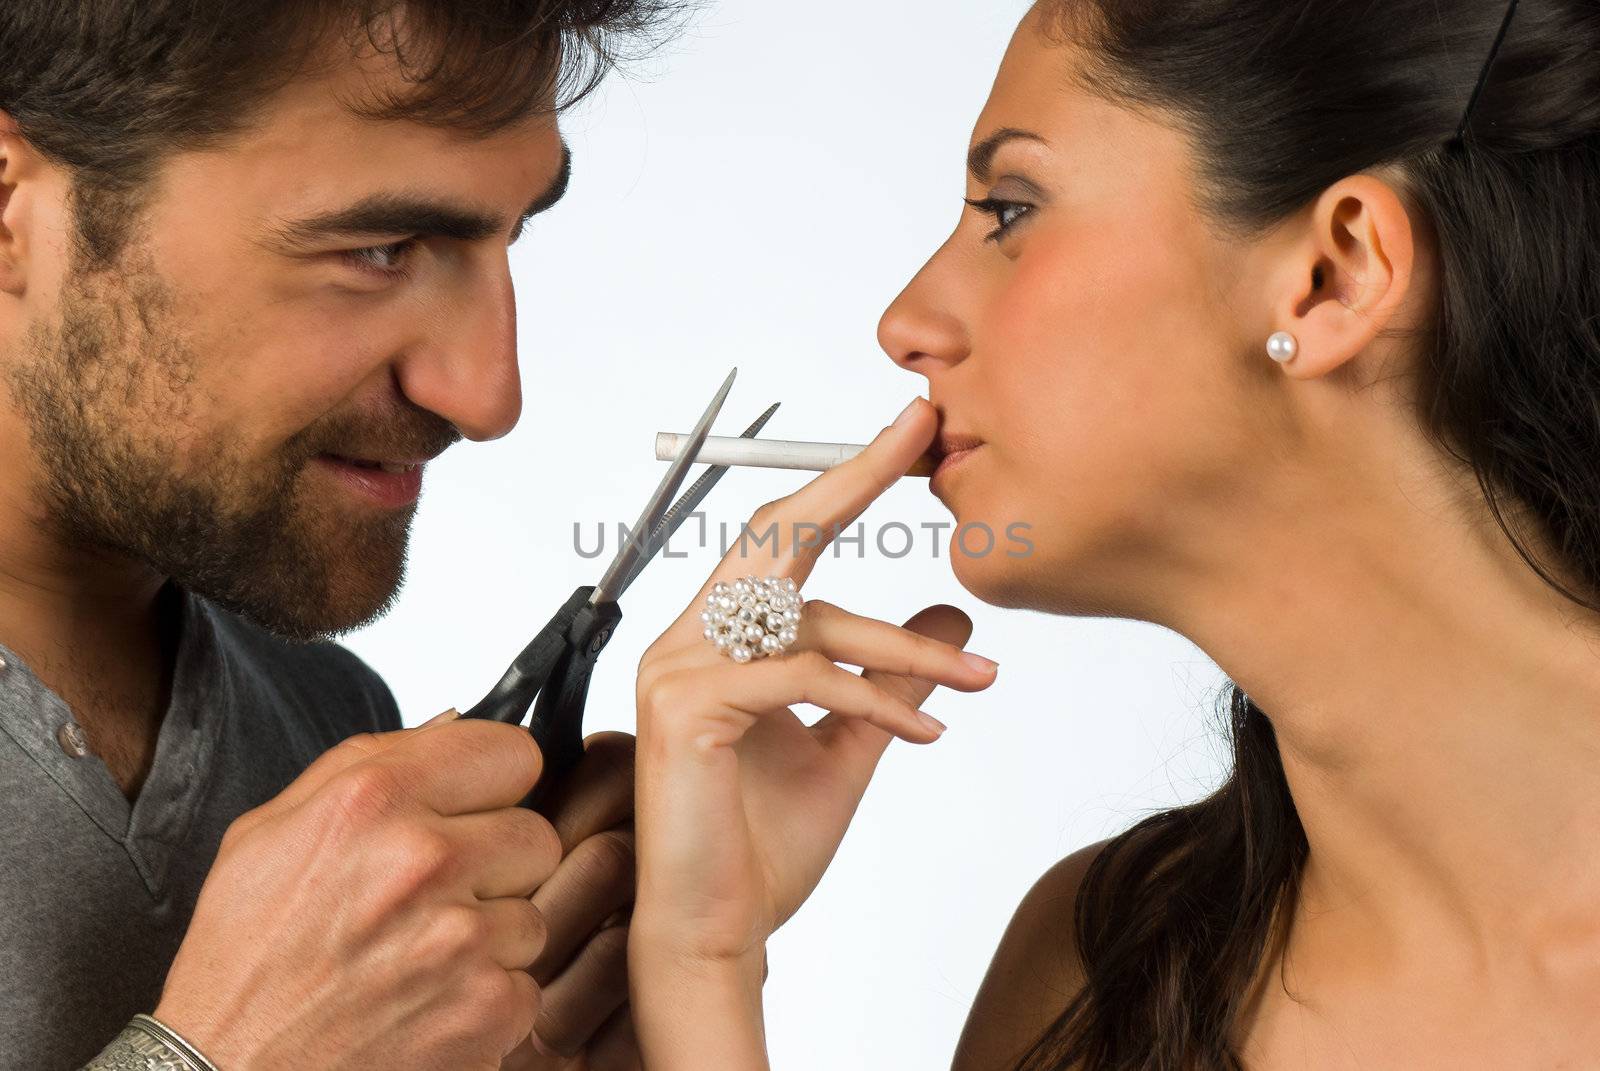 Guy trying to help his girlfriend stop smoking